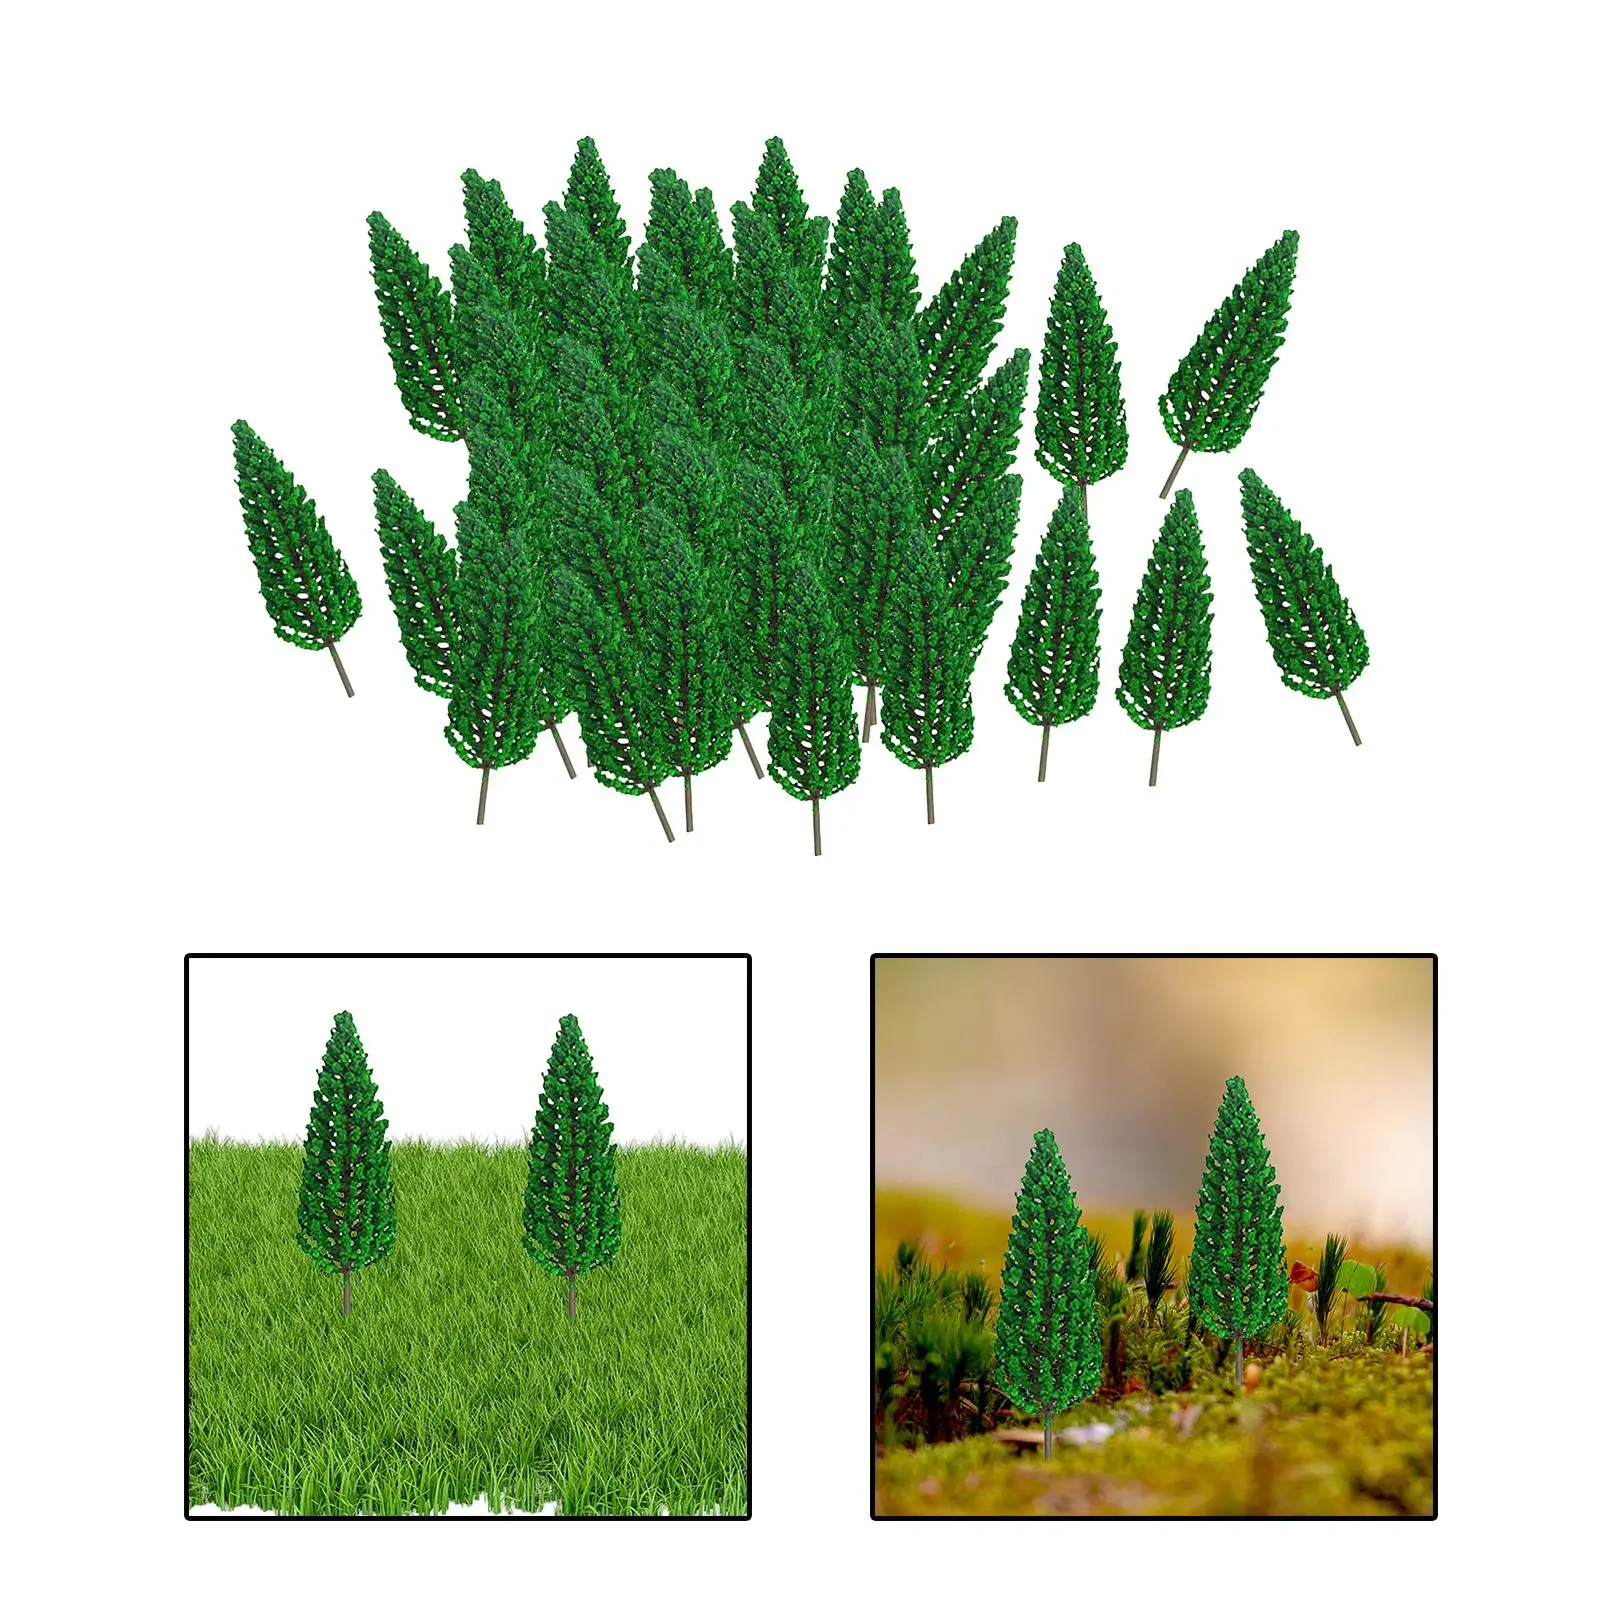 70x Miniature Landscape Trees 6cm Diorama Tree Train Scenery Architecture Trees for Building Sand Table Scenery Railroad Layout